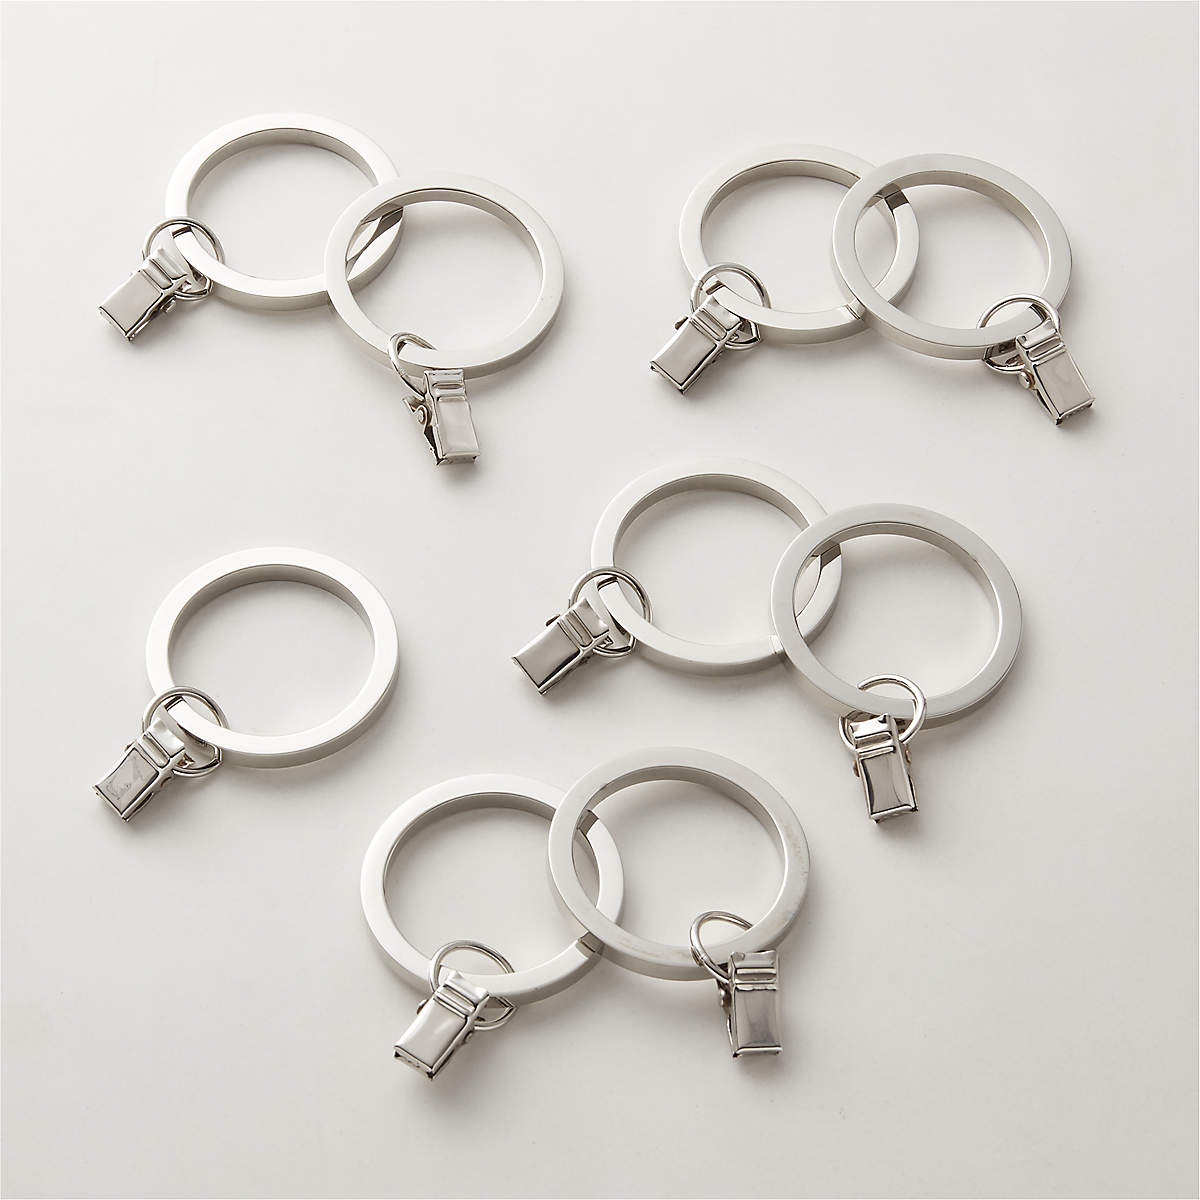 Polished Nickel Clip Rings Set Of 9 